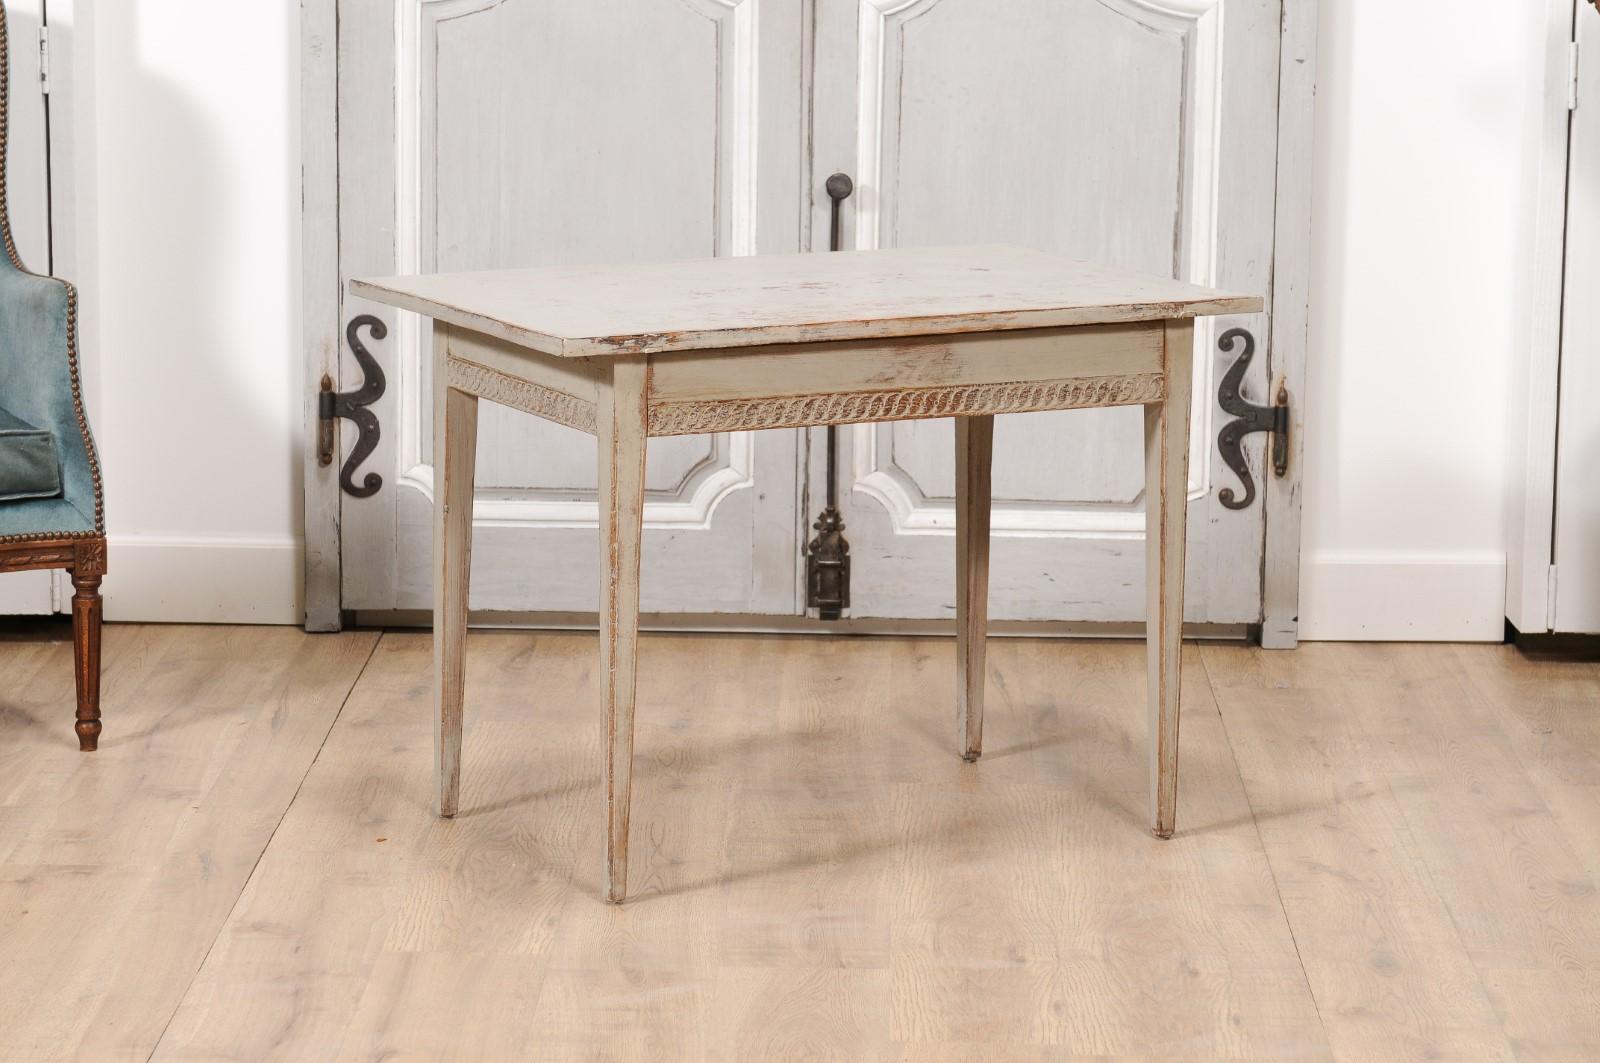 A Swedish Gustavian period painted wood side table from circa 1790 with carved guilloches on the apron, distressed finish and tapered legs. Immerse yourself in the pure, unadulterated elegance of Swedish Gustavian design with this painted wood side